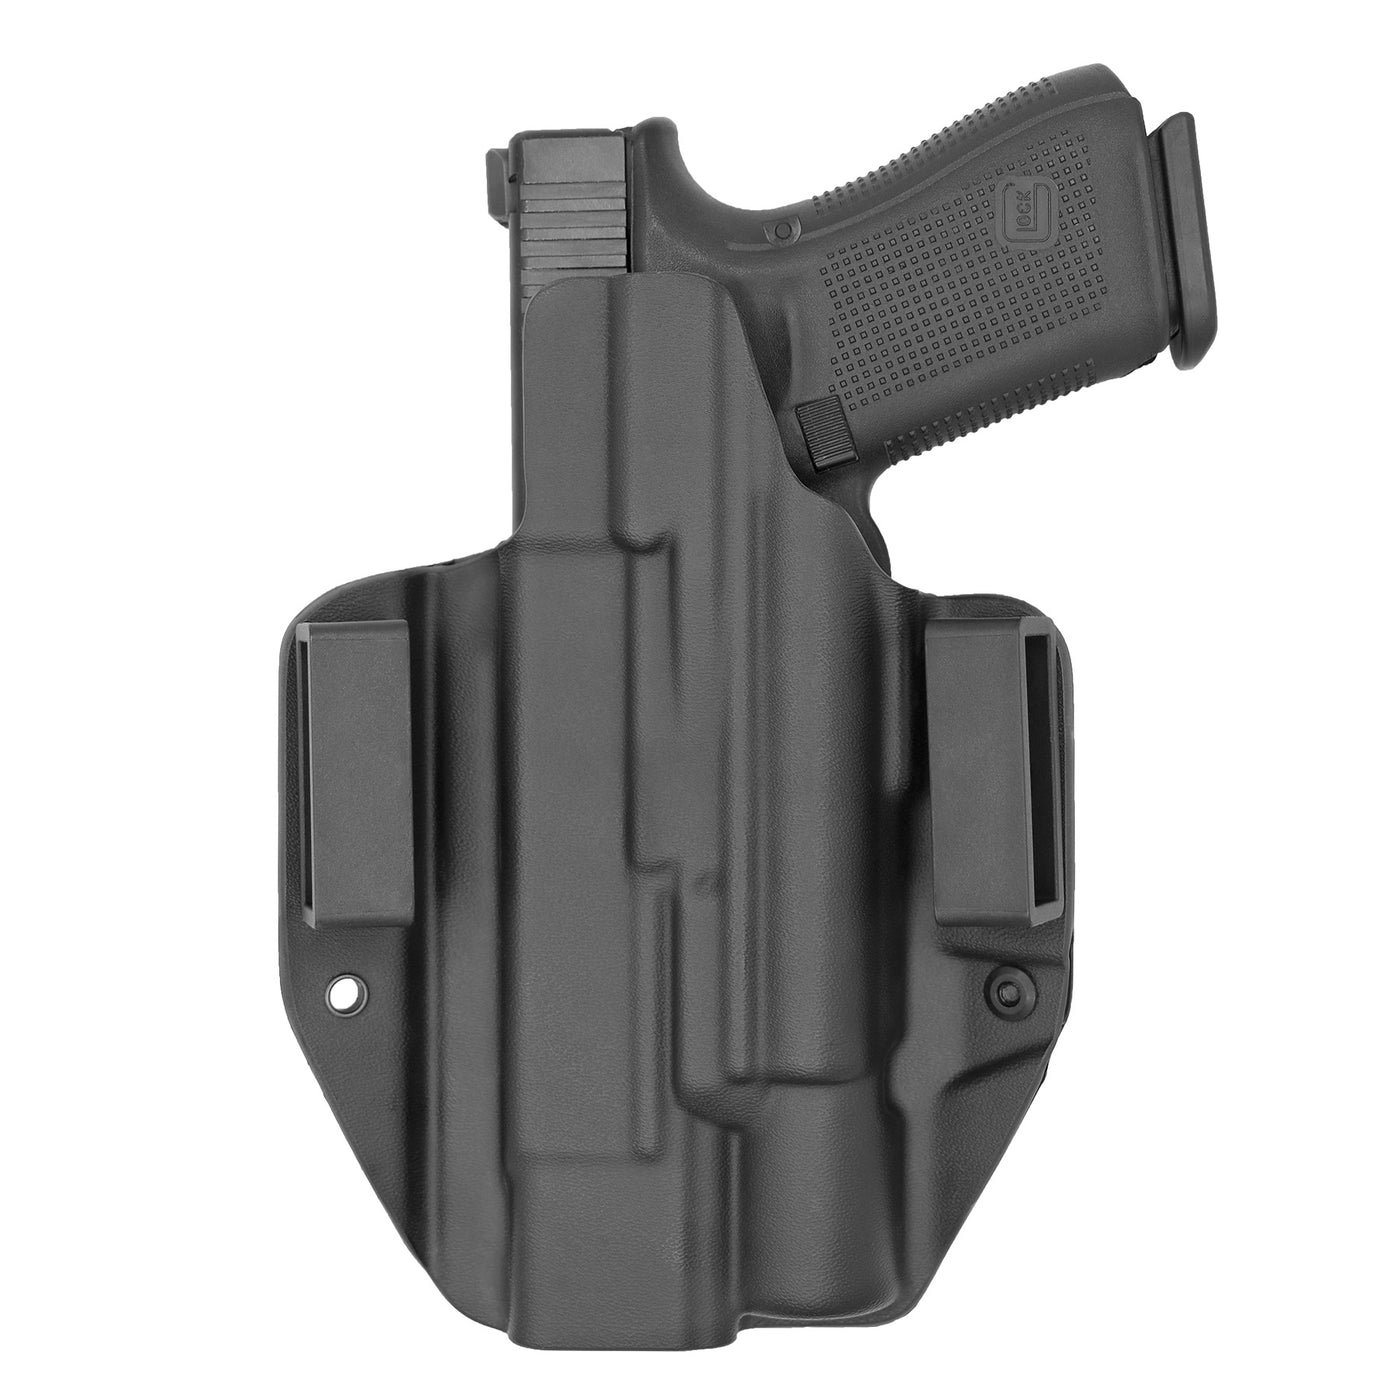 C&G Holsters custom OWB Tactical Poly80 Surefire X300 in holstered position back view